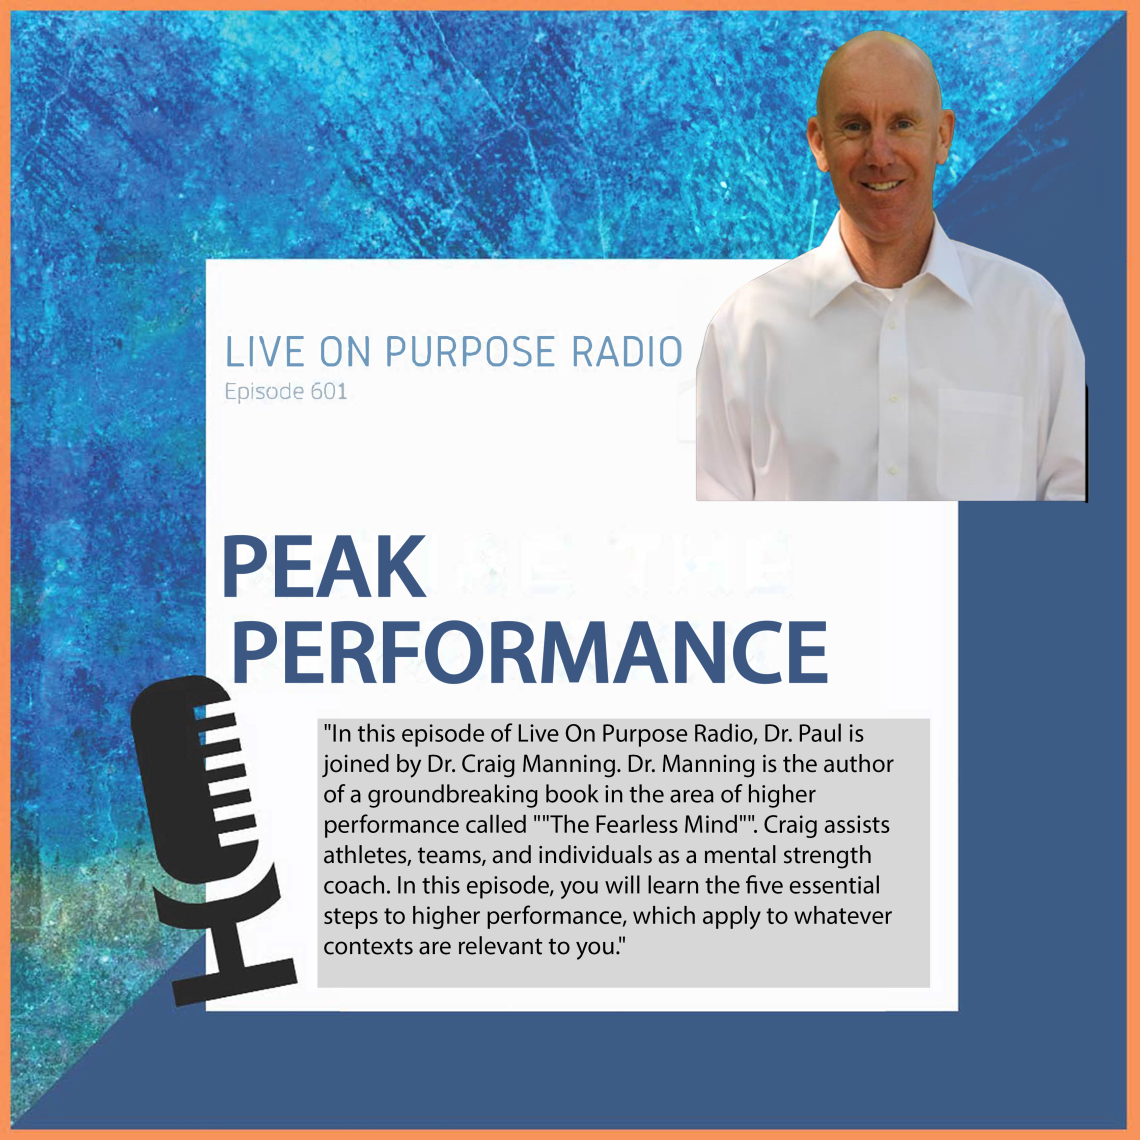 LIVE ON PURPOSE RADIO Episode 601 PEAK PERFORMANCE "In this episode of Live On Purpose Radio, Dr. Paul is joined by Dr. Craig Manning. Dr. Manning is the author of a groundbreaking book in the area of higher performance called "''The Fearless Mind"'. Craig assists athletes, teams, and individuals as a mental strength coach. In this episode, you will learn the five essential steps to higher performance, which apply to whatever contexts are relevant to you."